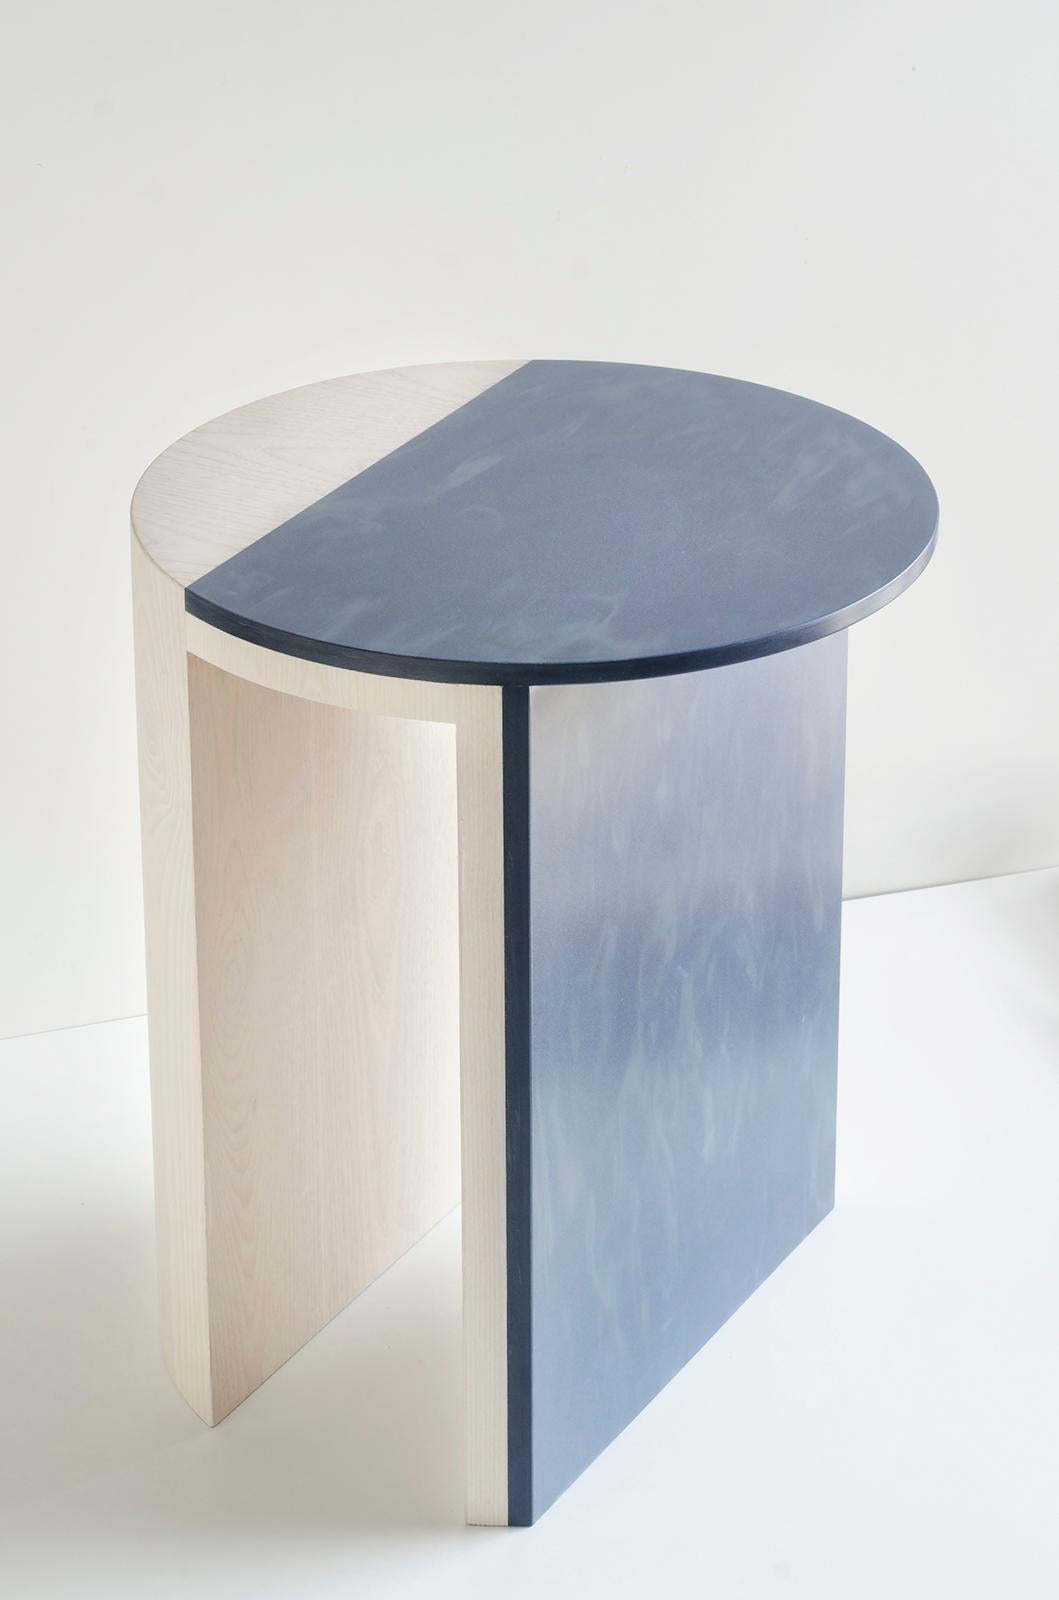 Gibbous Blue and White Side Table by Robert Sukrachand, Made in USA (amerikanisch) im Angebot